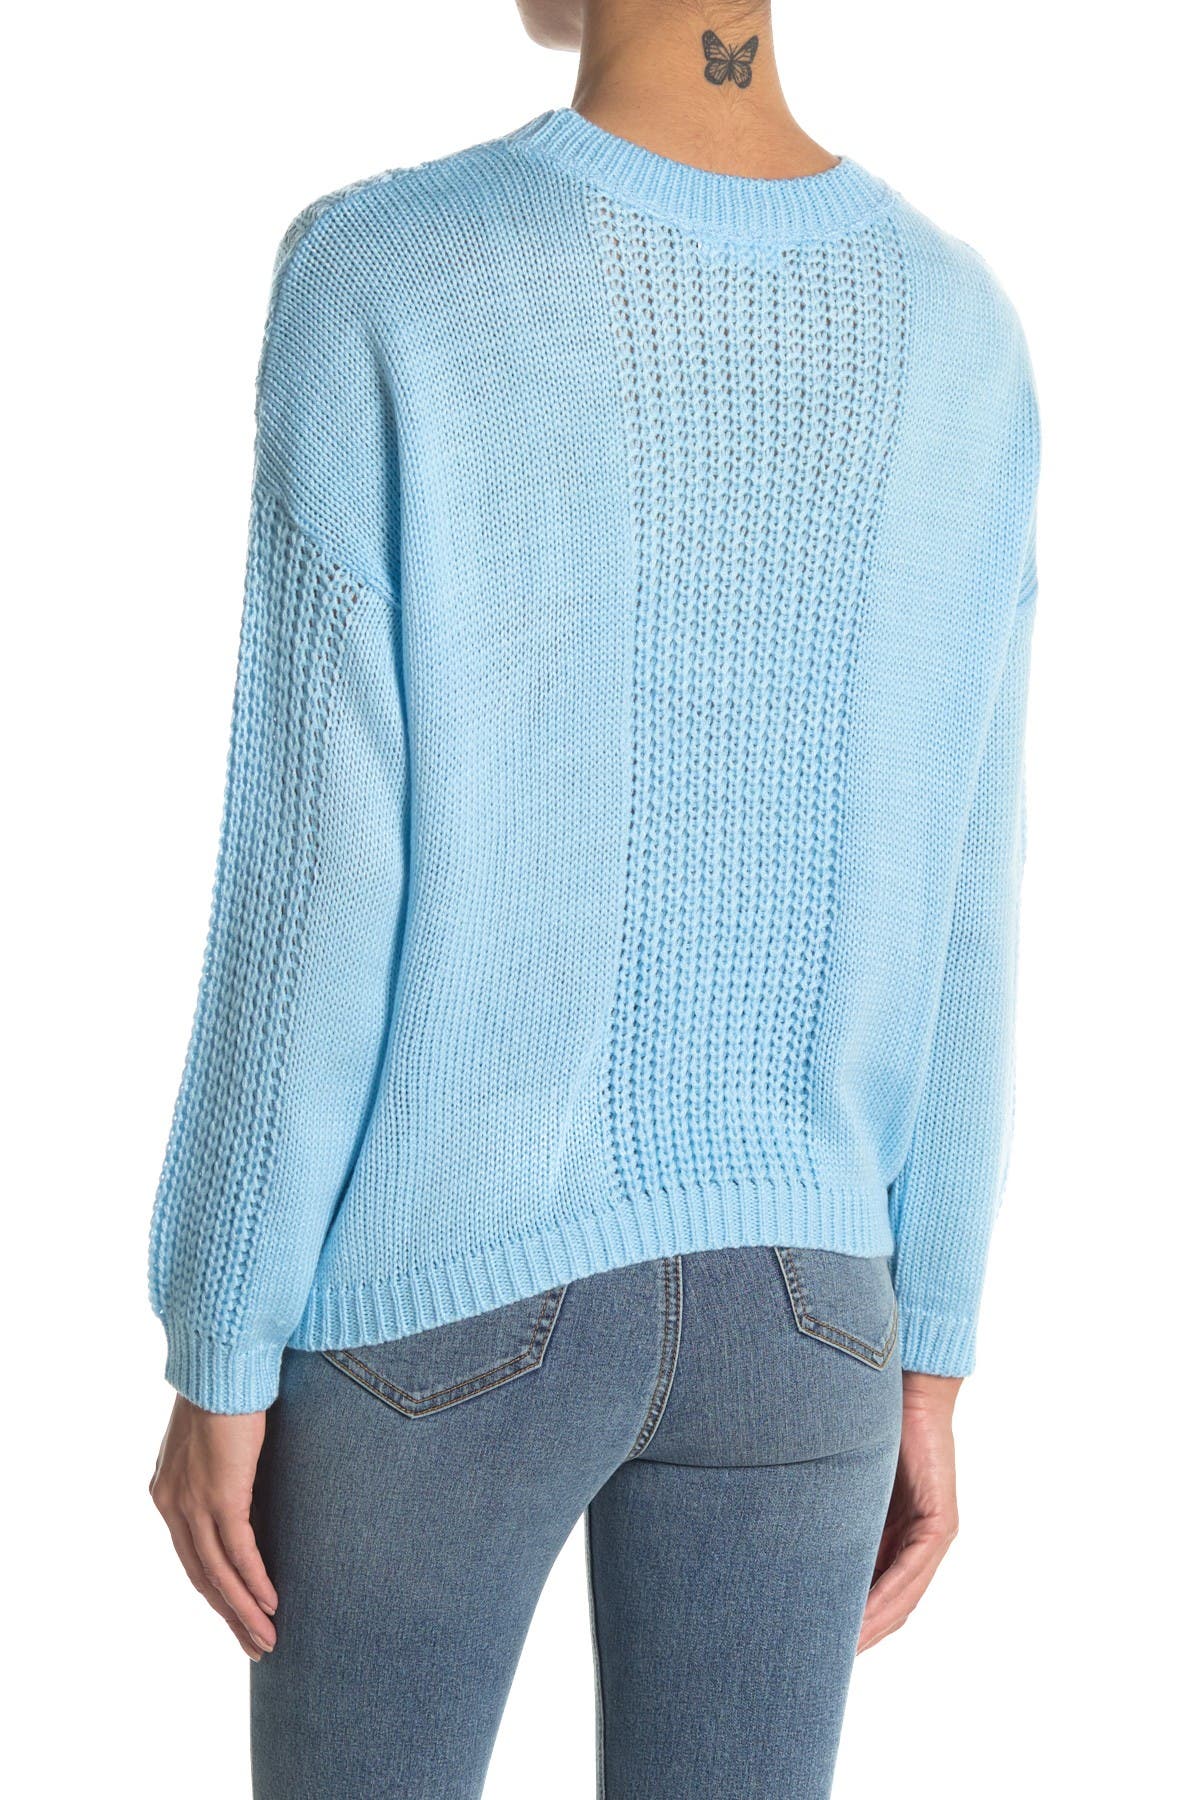 Abound Crew Neck Cable Knit Sweater In Light/pastel Blue